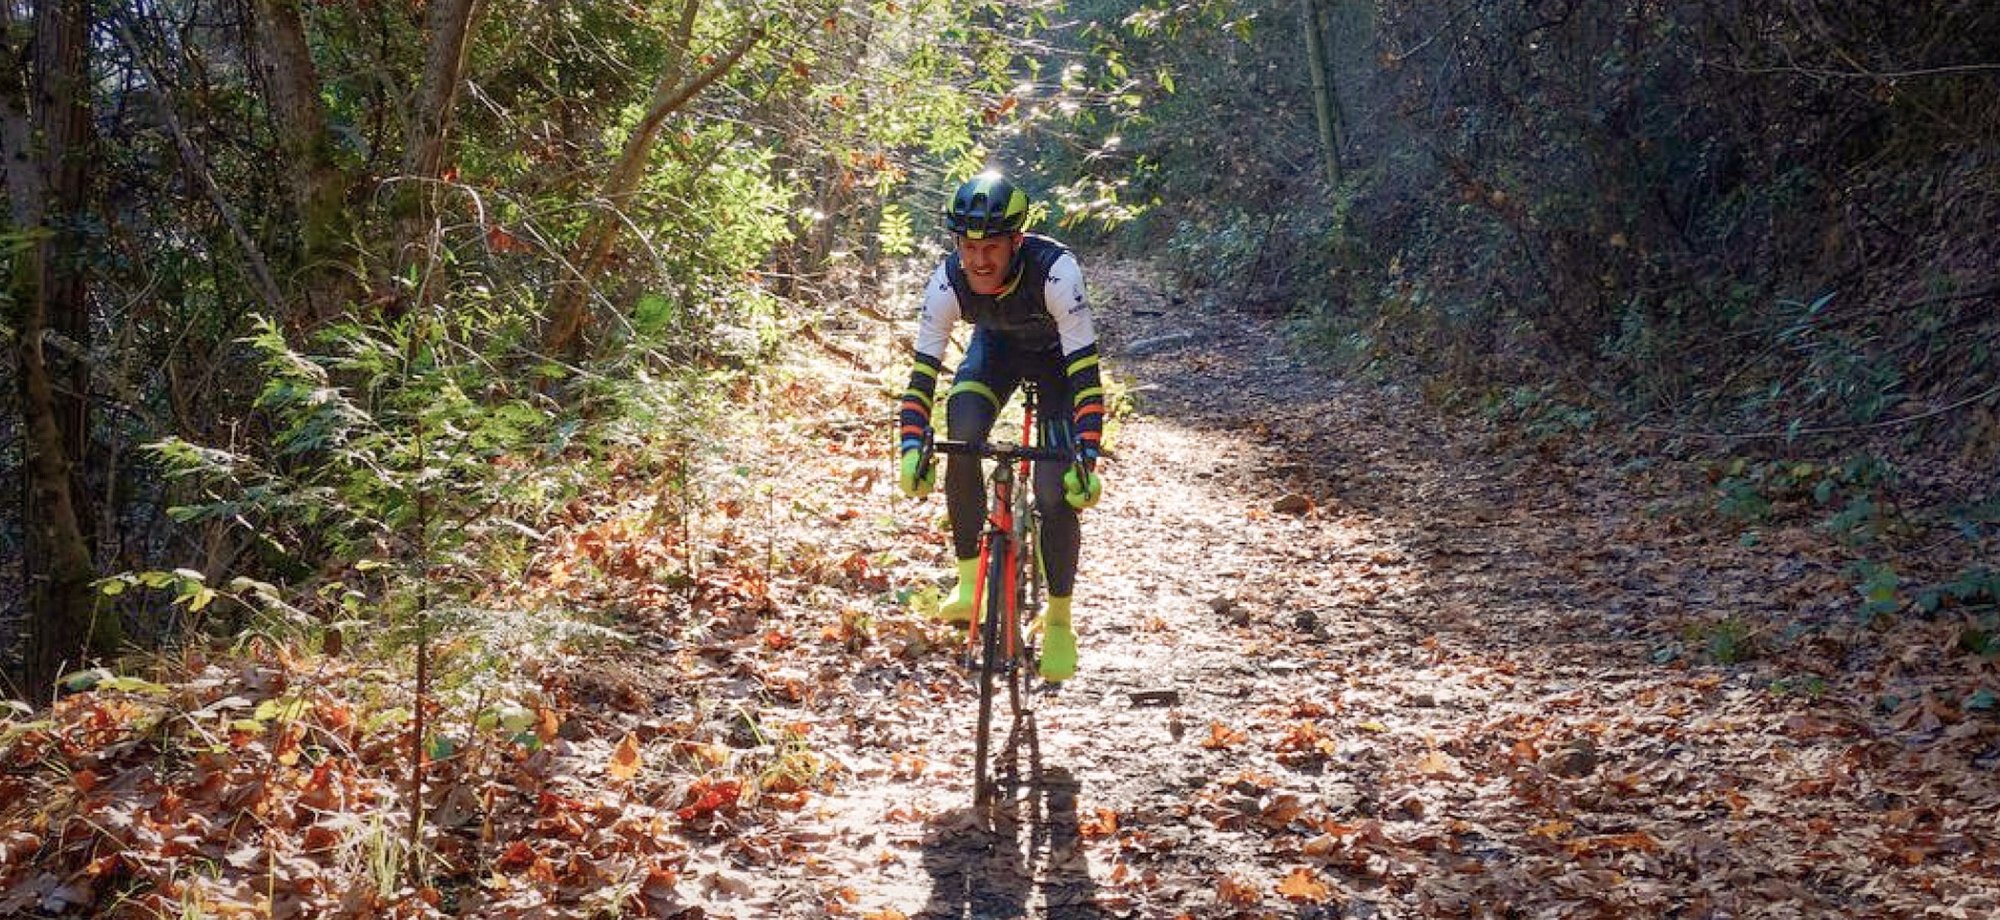 Ryan - Our Marketing Manager Riding on gravel trail